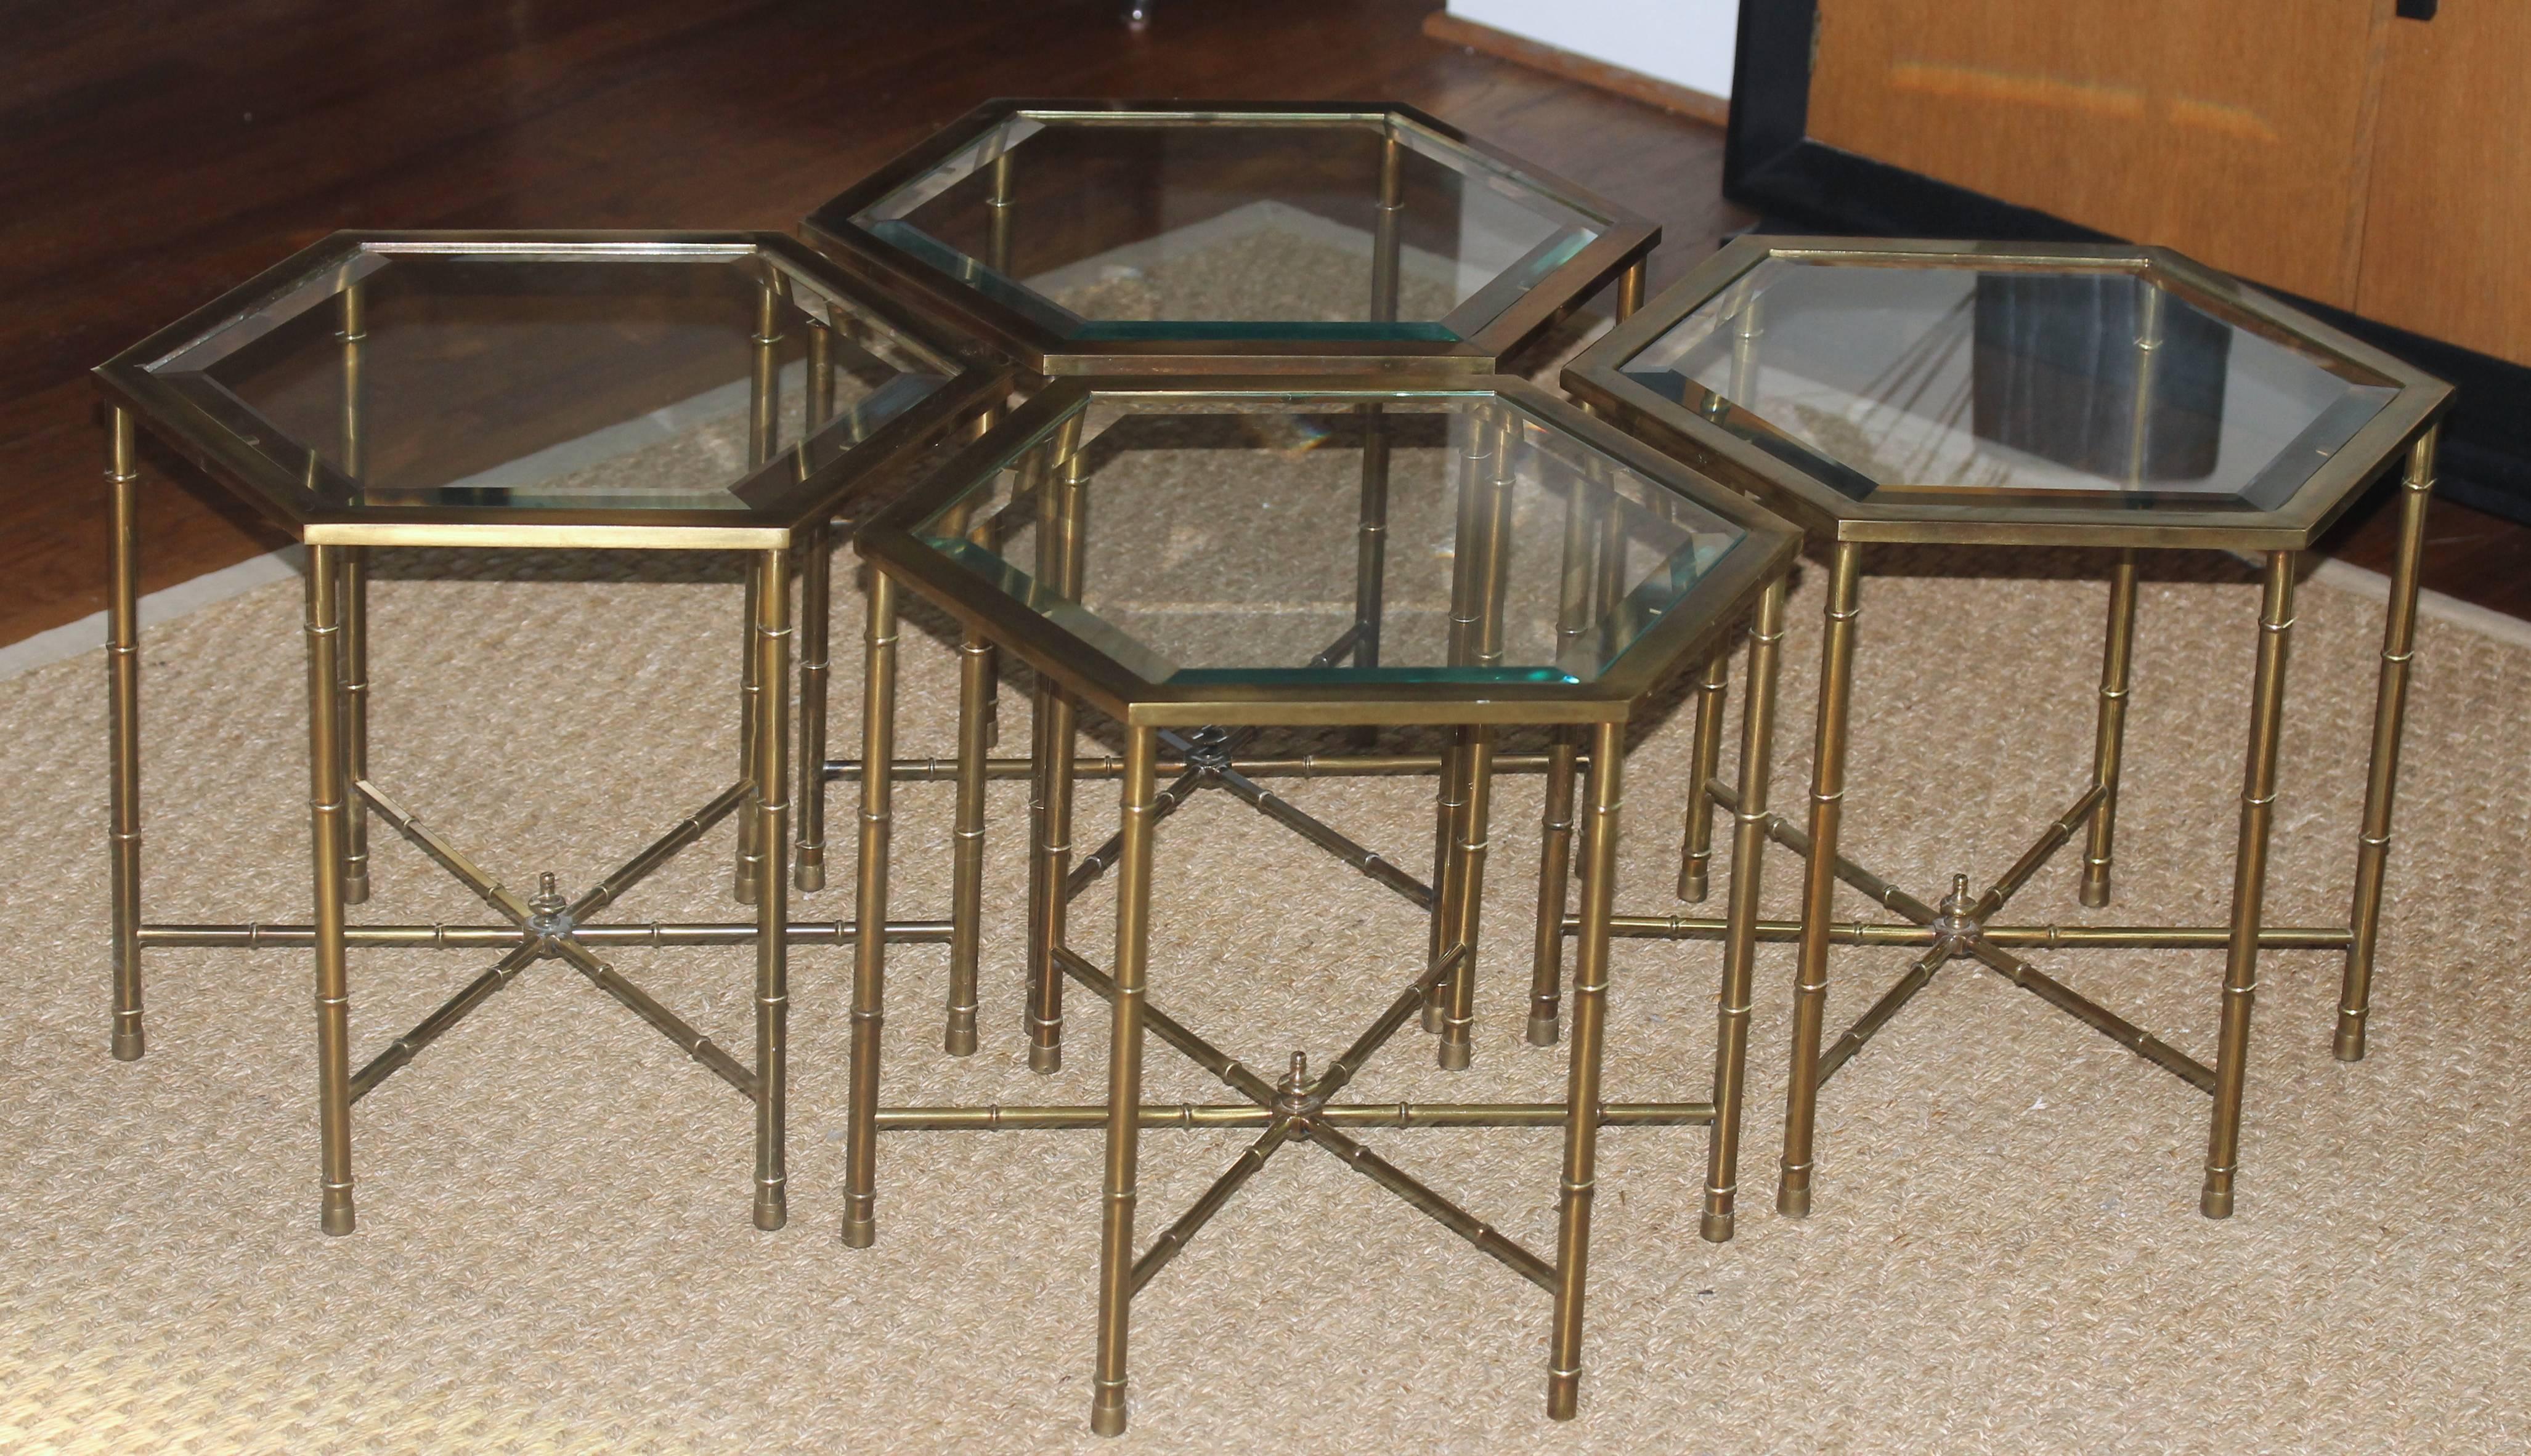 4 hexagonal brass faux bamboo side or occasional tables with inset beveled glass tops by Mastercraft. Price is per single table.